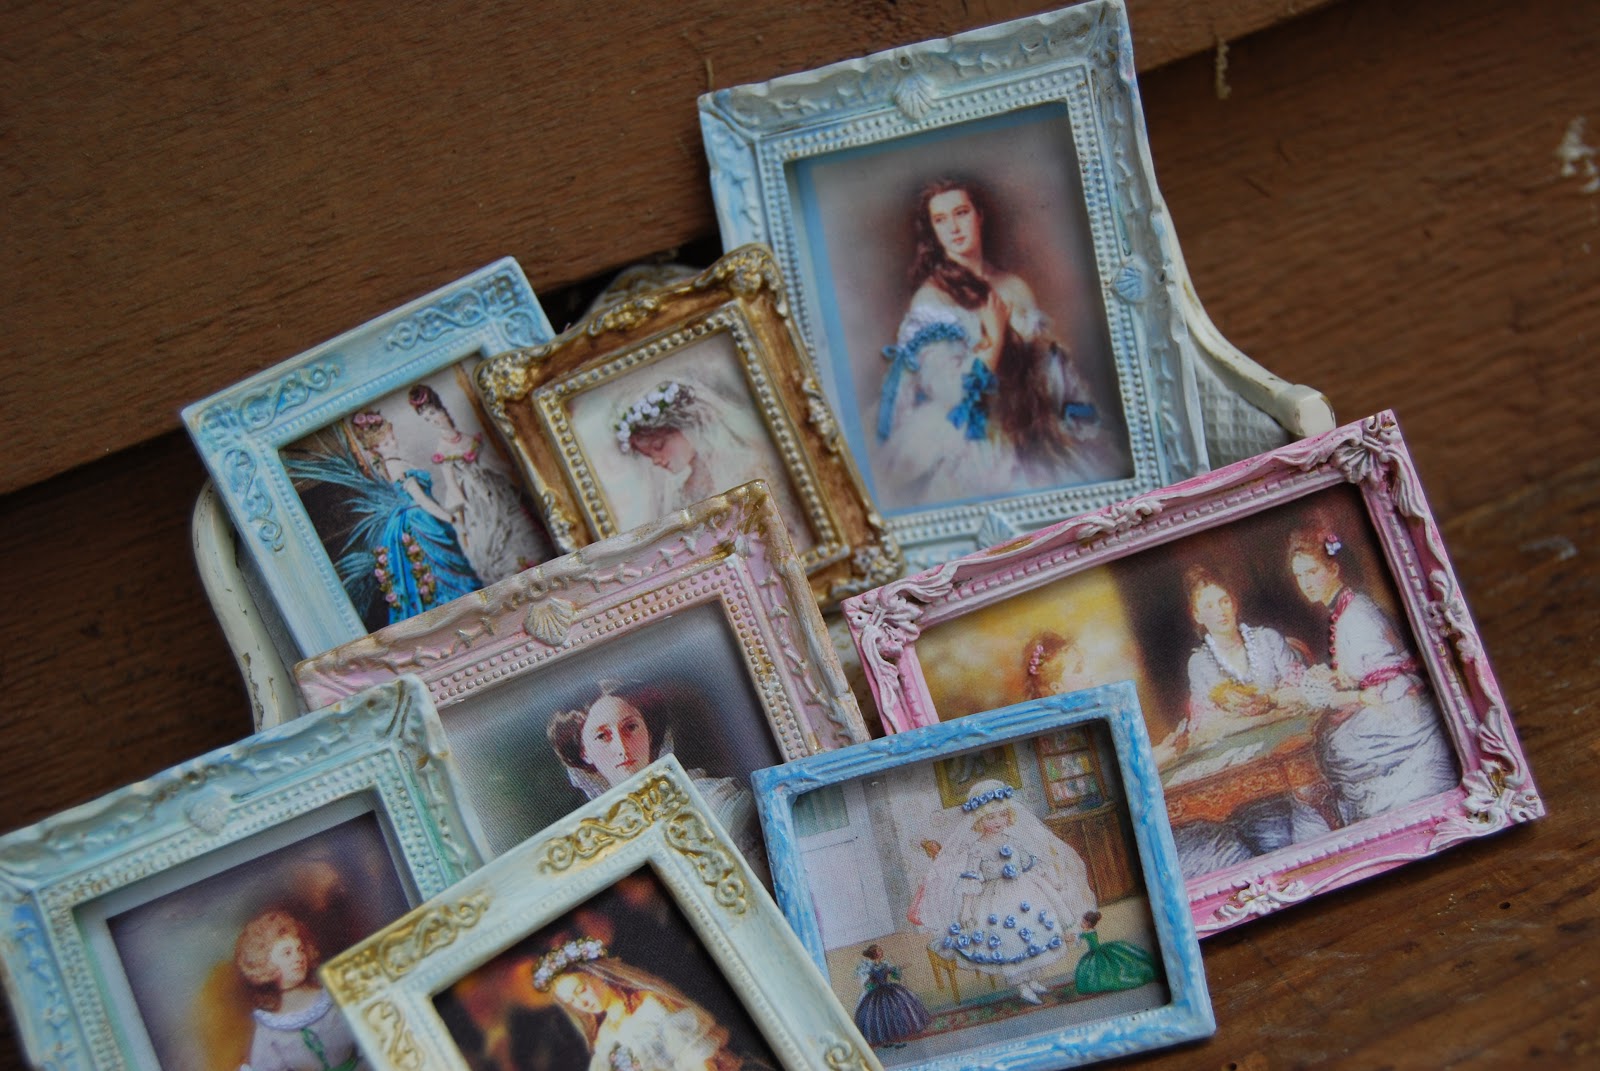 CDHM Artisan Katie Arthur of Dollhouse Miniatures and Hitty Art 1:12 dollhouse miniature fine arts, quilts and patterns, linens, bedding, hand painted paintings, drapes